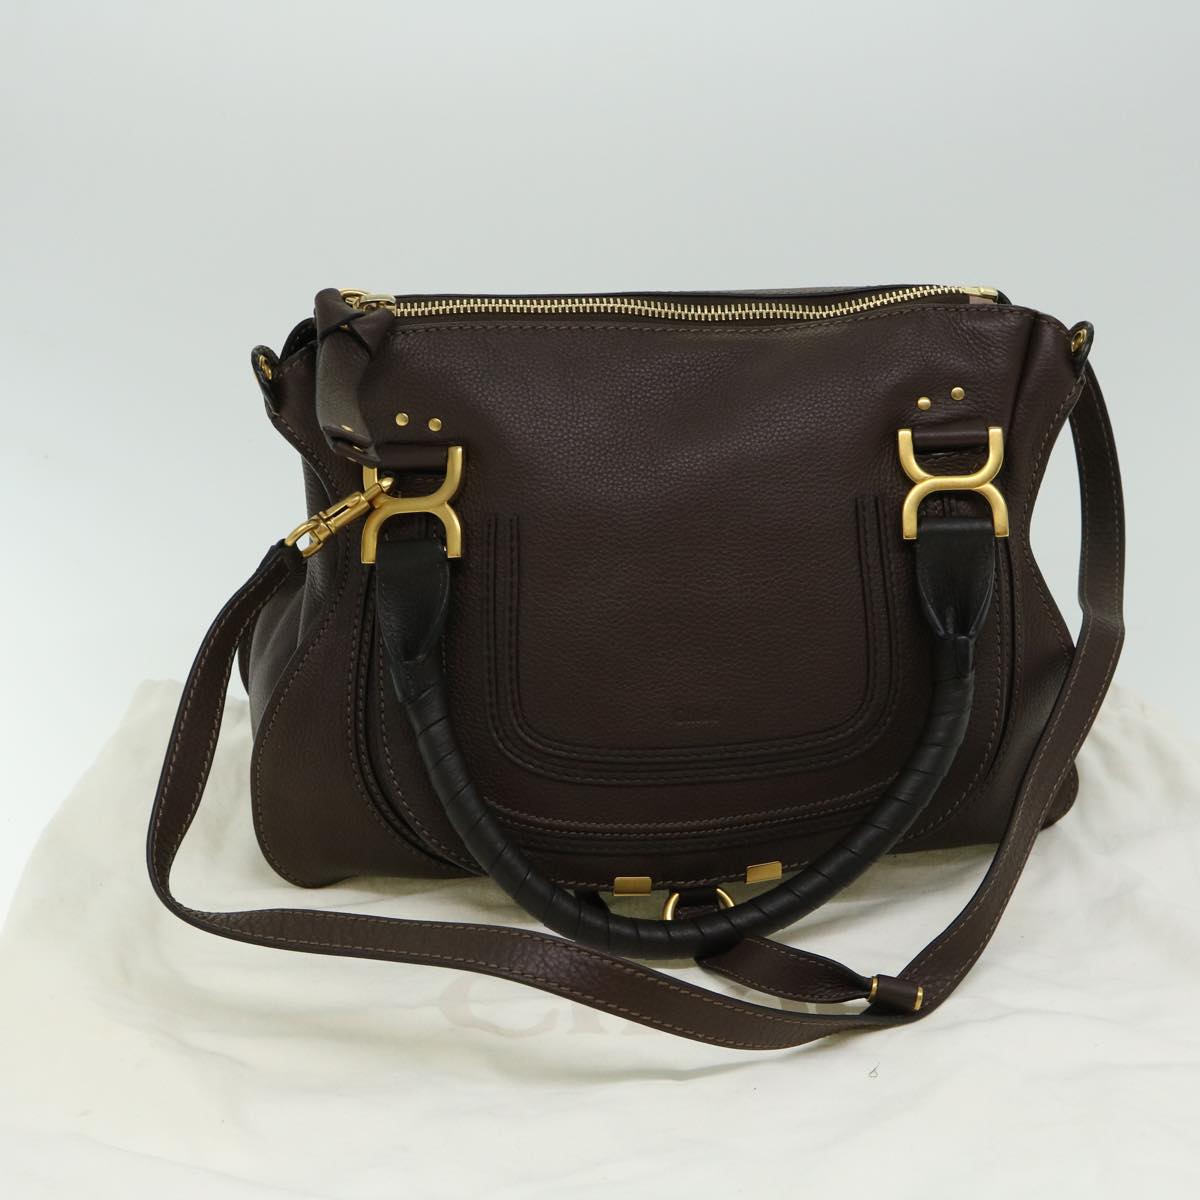 Chloe Mercy Hand Bag Leather 2way Brown Auth am5851